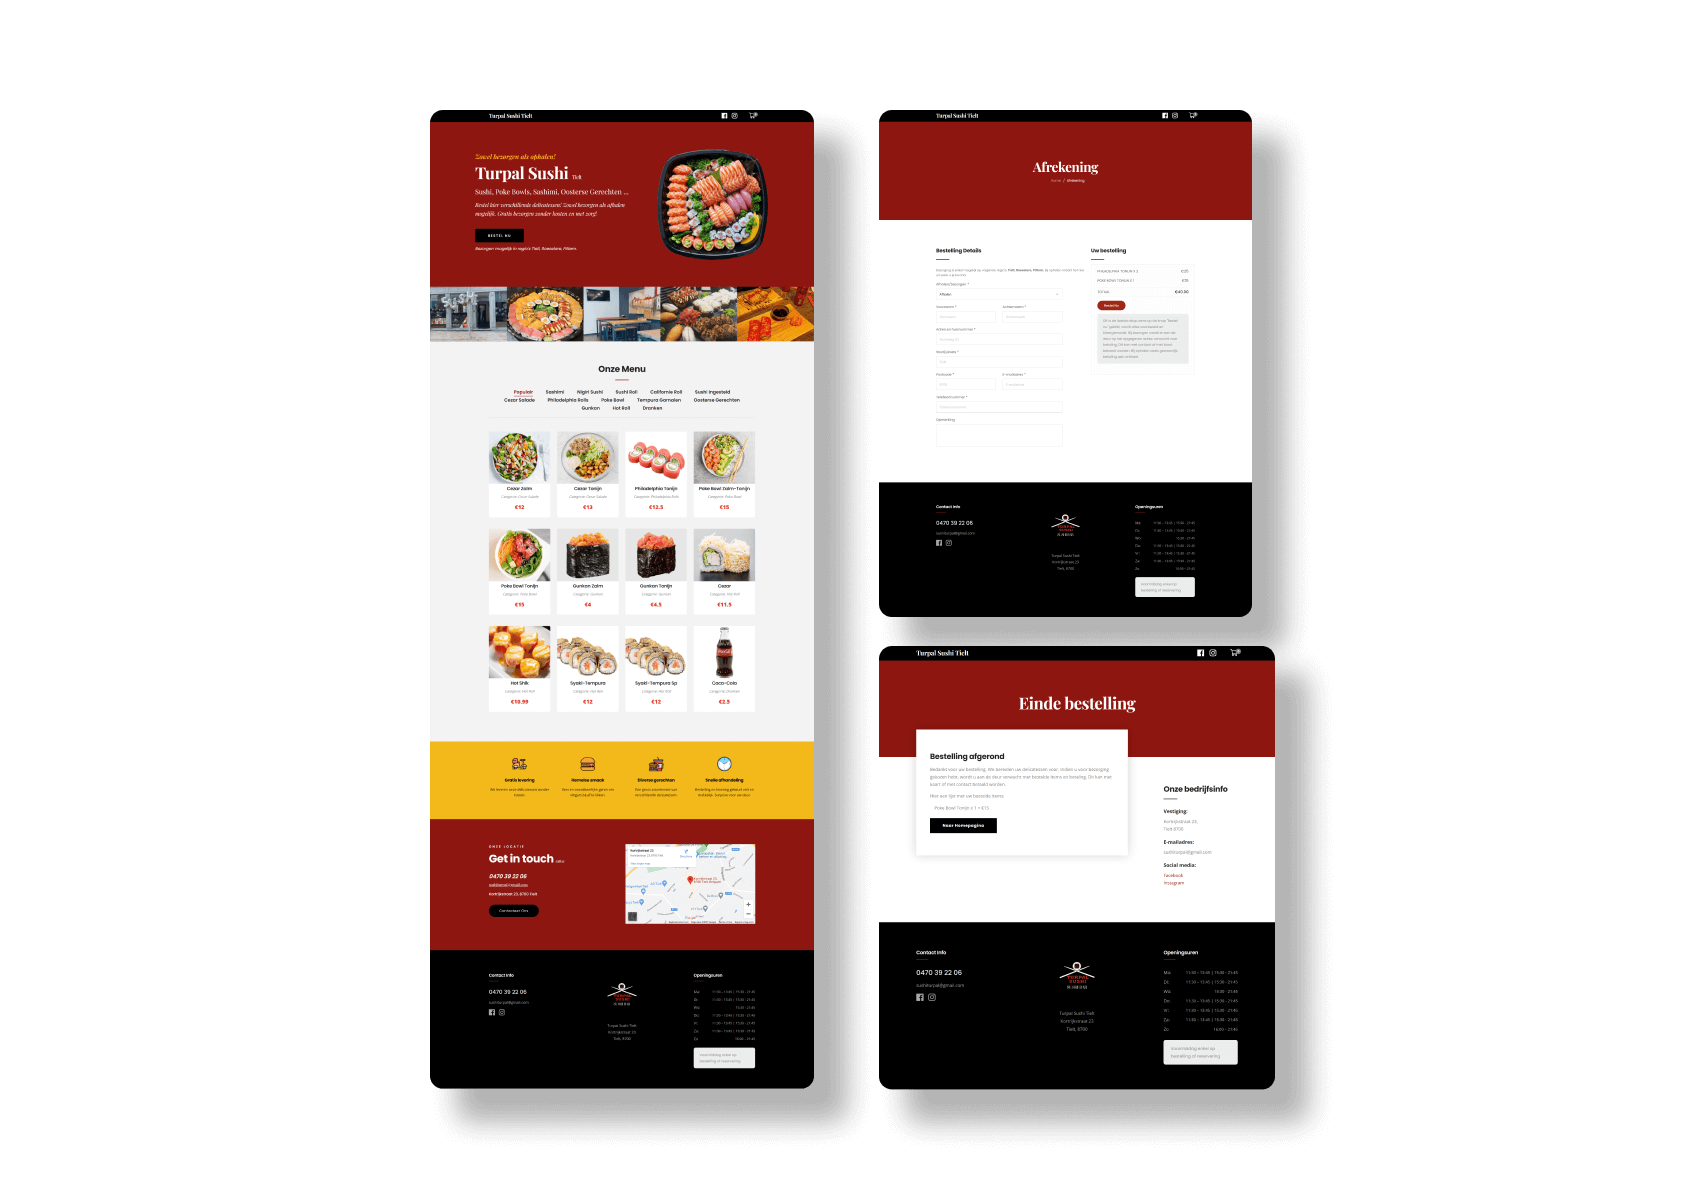 Landing page, checkout page, and confirmation page of Turpal Sushi Tielt web app.